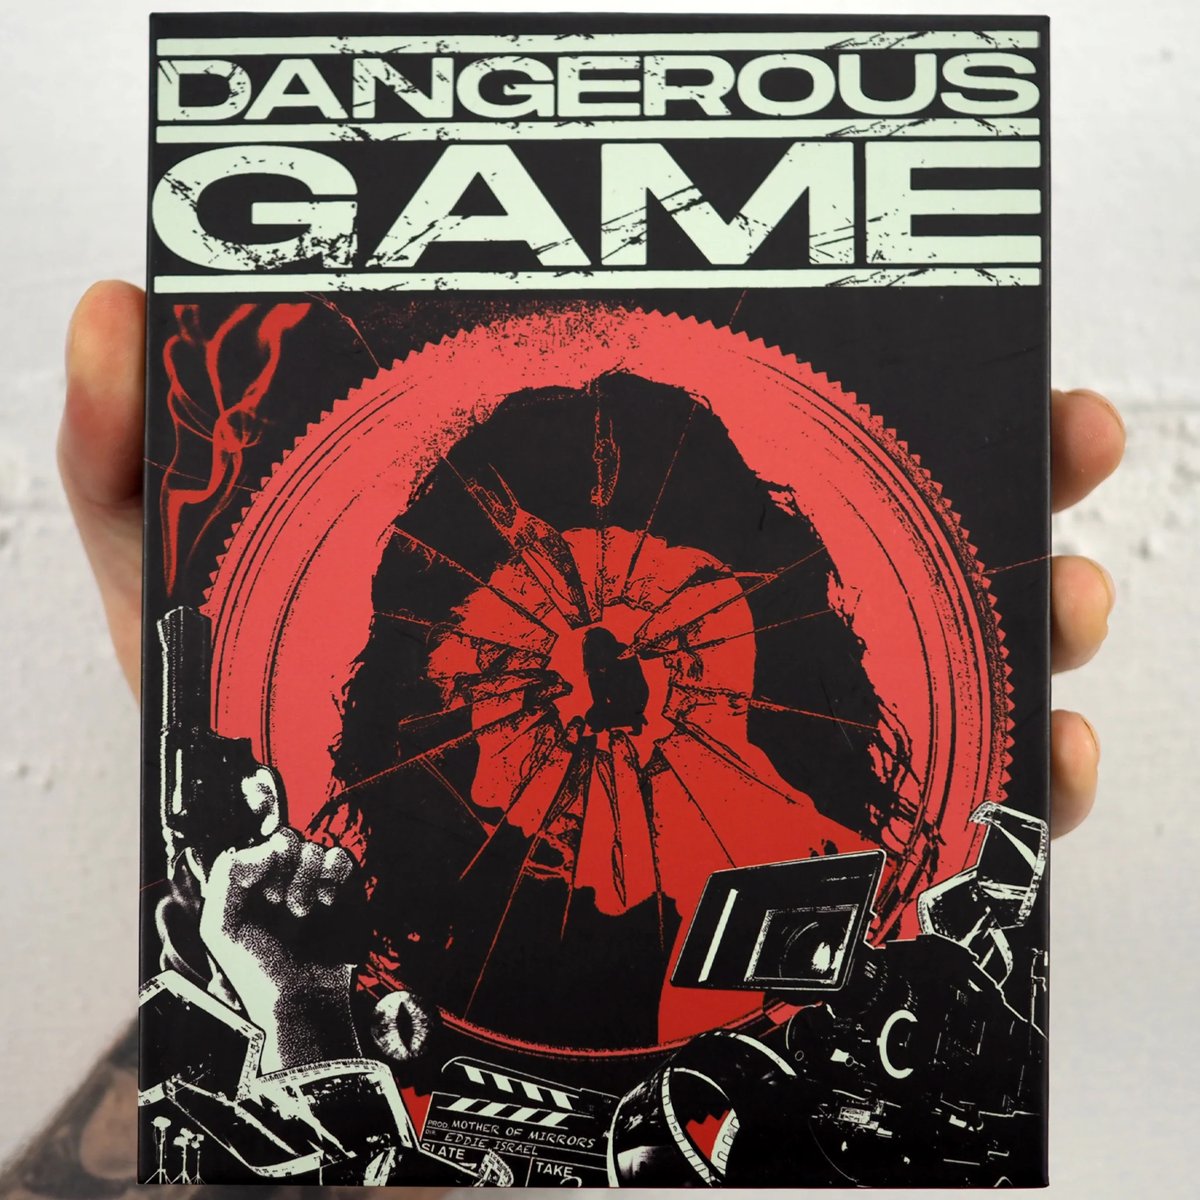 ANNOUNCEMENT: Bill Ackerman of the @Characters_Pod (amongst other things) and myself contributed an audio commentary for this Cinématographe release of DANGEROUS GAME (1993)! This Abel Ferrara film is one of my all-time favourites and I'm delighted Bill asked me to work on this.